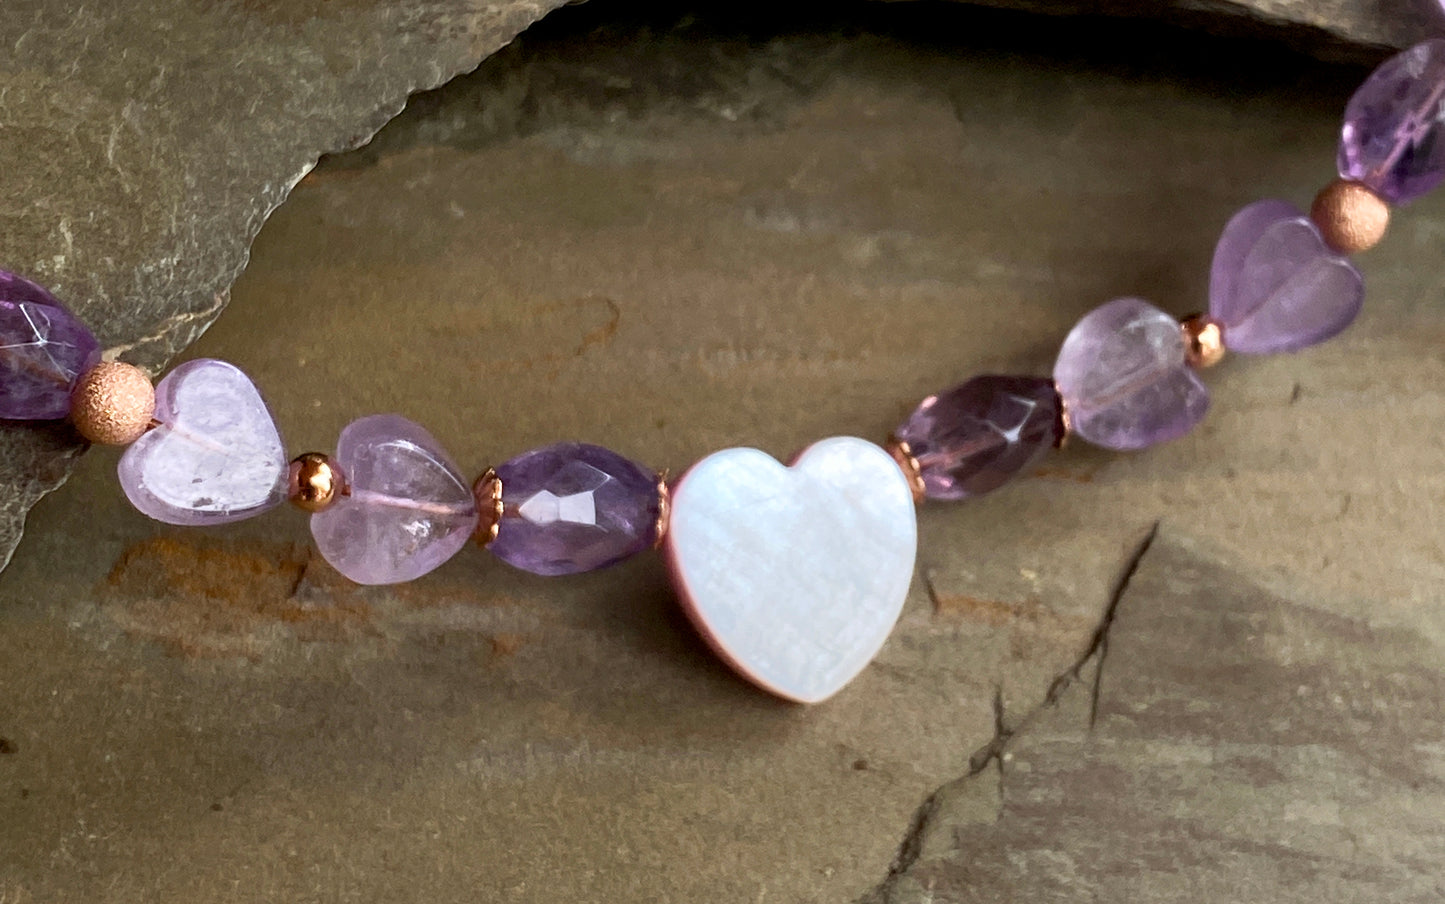 Women’s mother of pearl heart, amethyst, 14 kt rose gold fill necklace